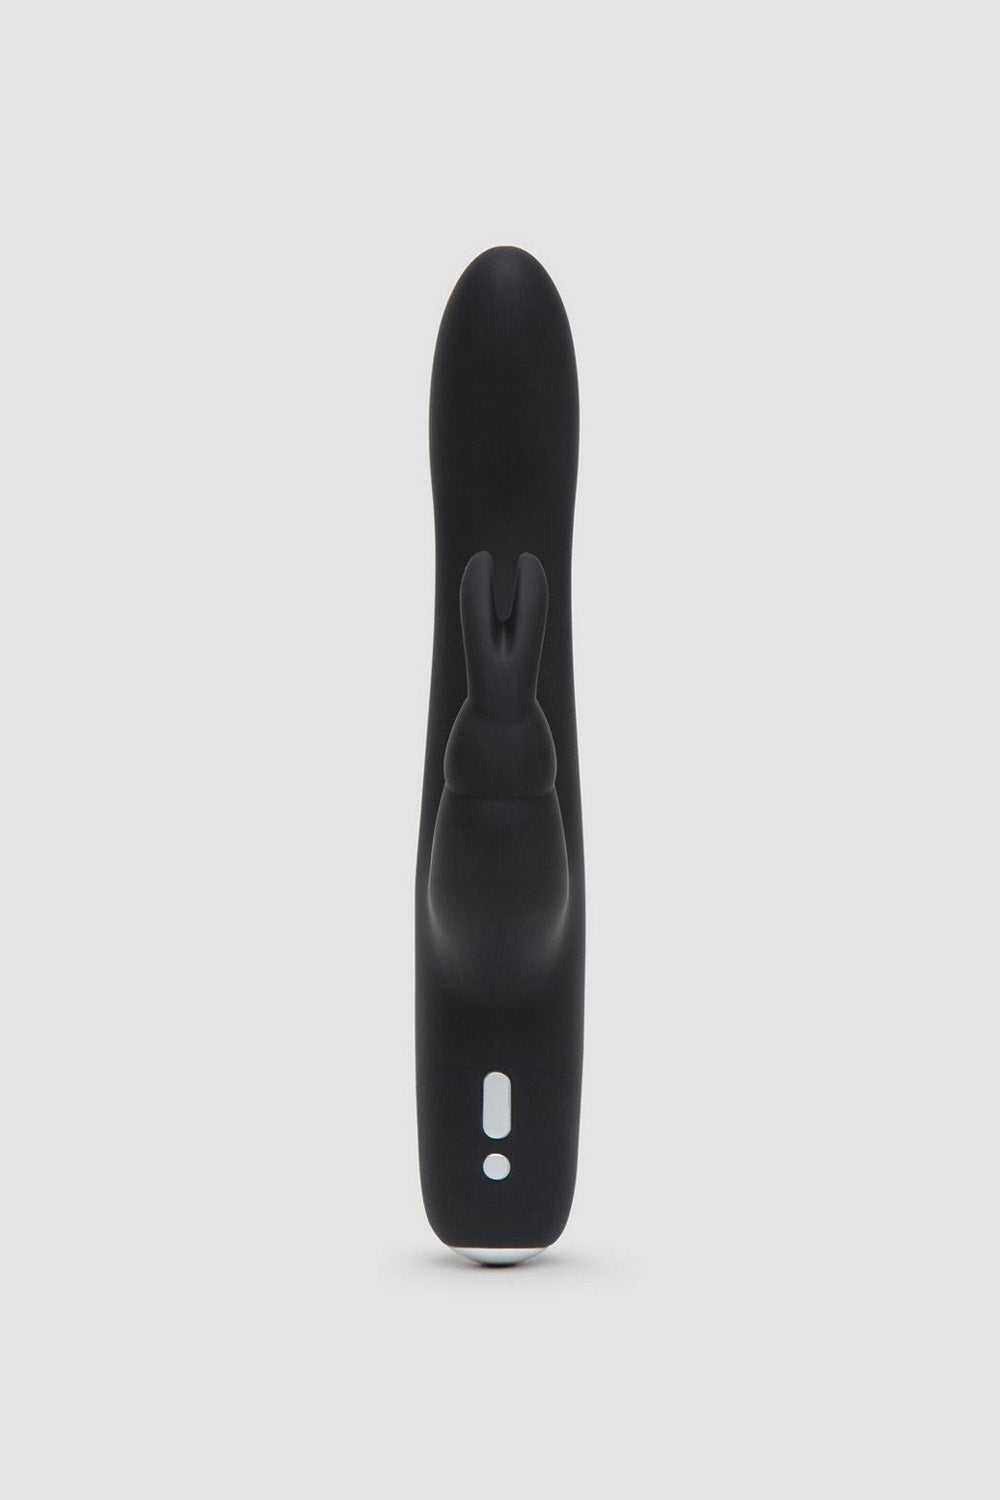 Fifty Shades of Grey Greedy Girl Rechargeable Slimline Rabbit Vibrator, 9 Inches